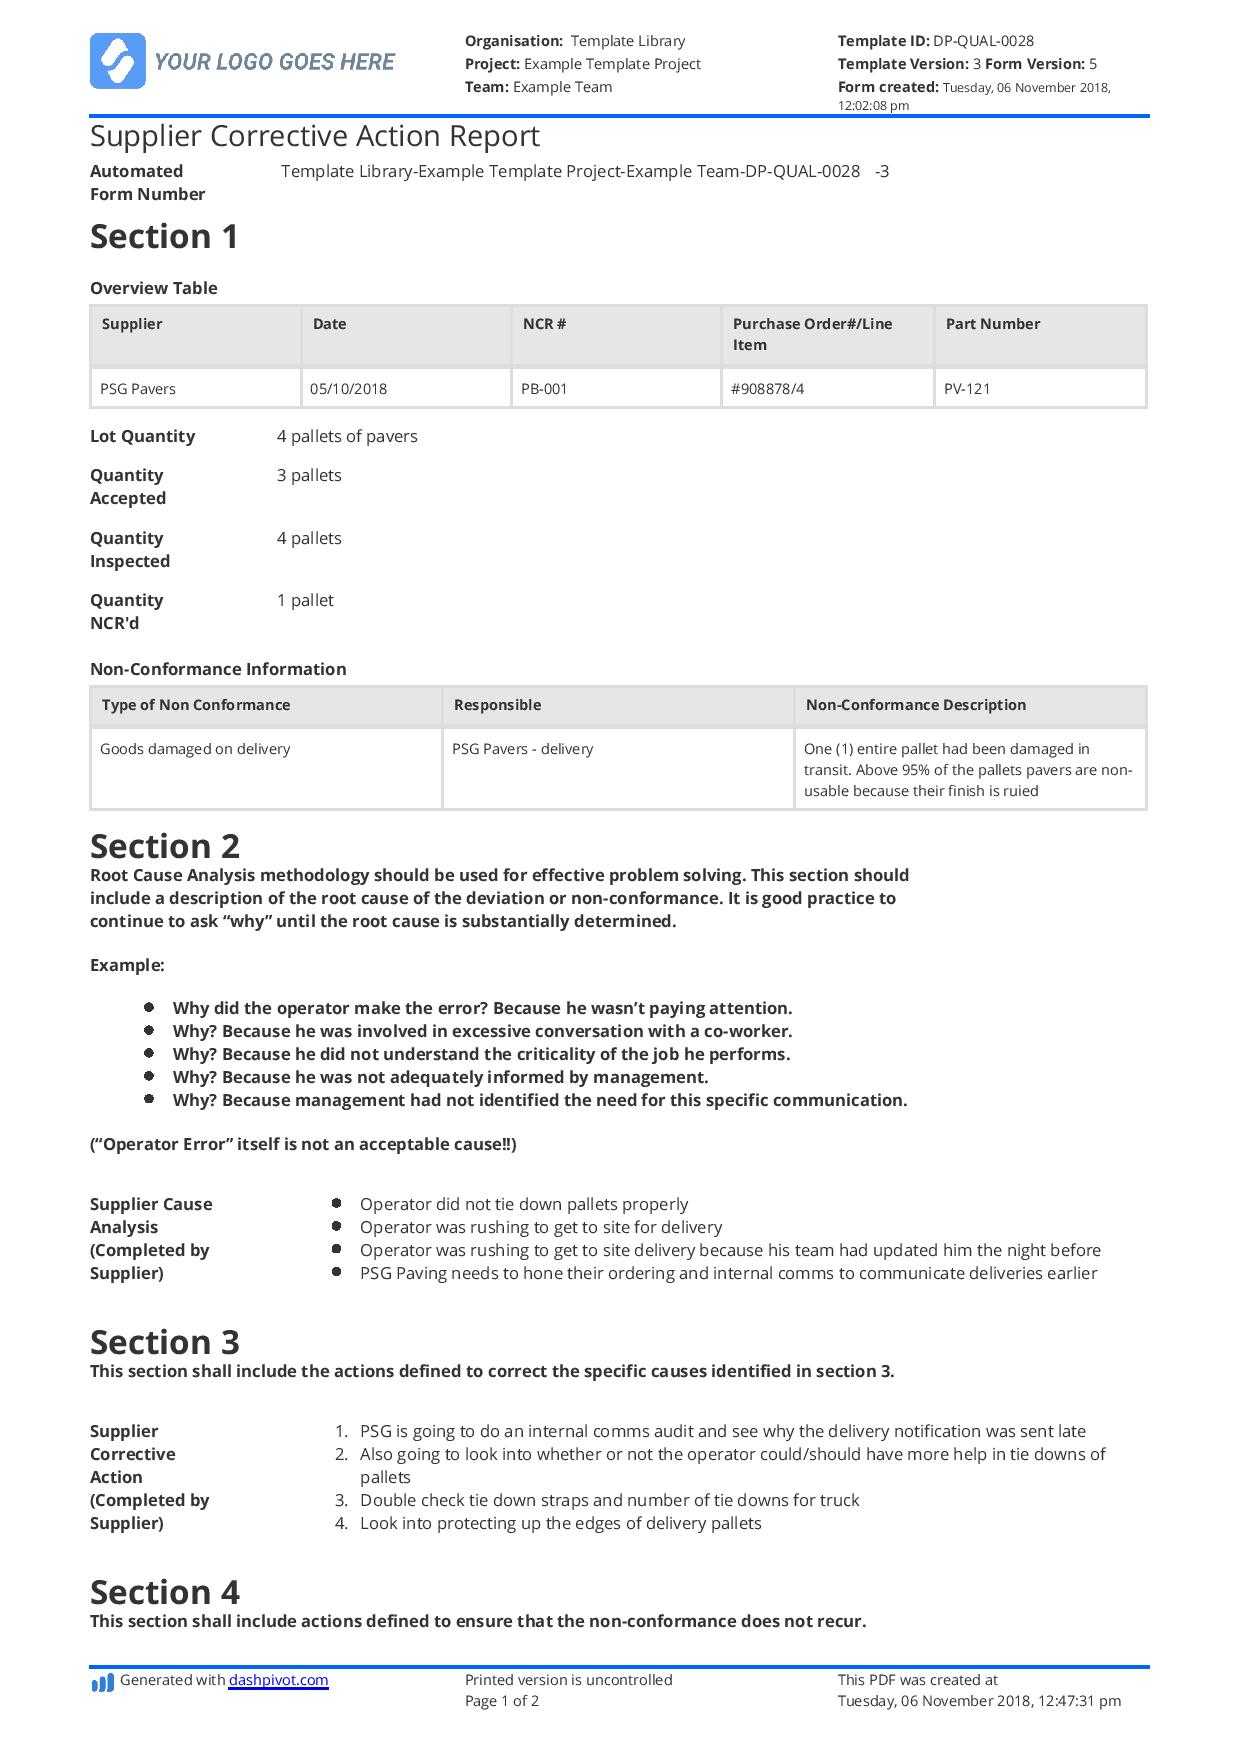 Supplier Corrective Action Report Template: Improve Your Within Check Out Report Template